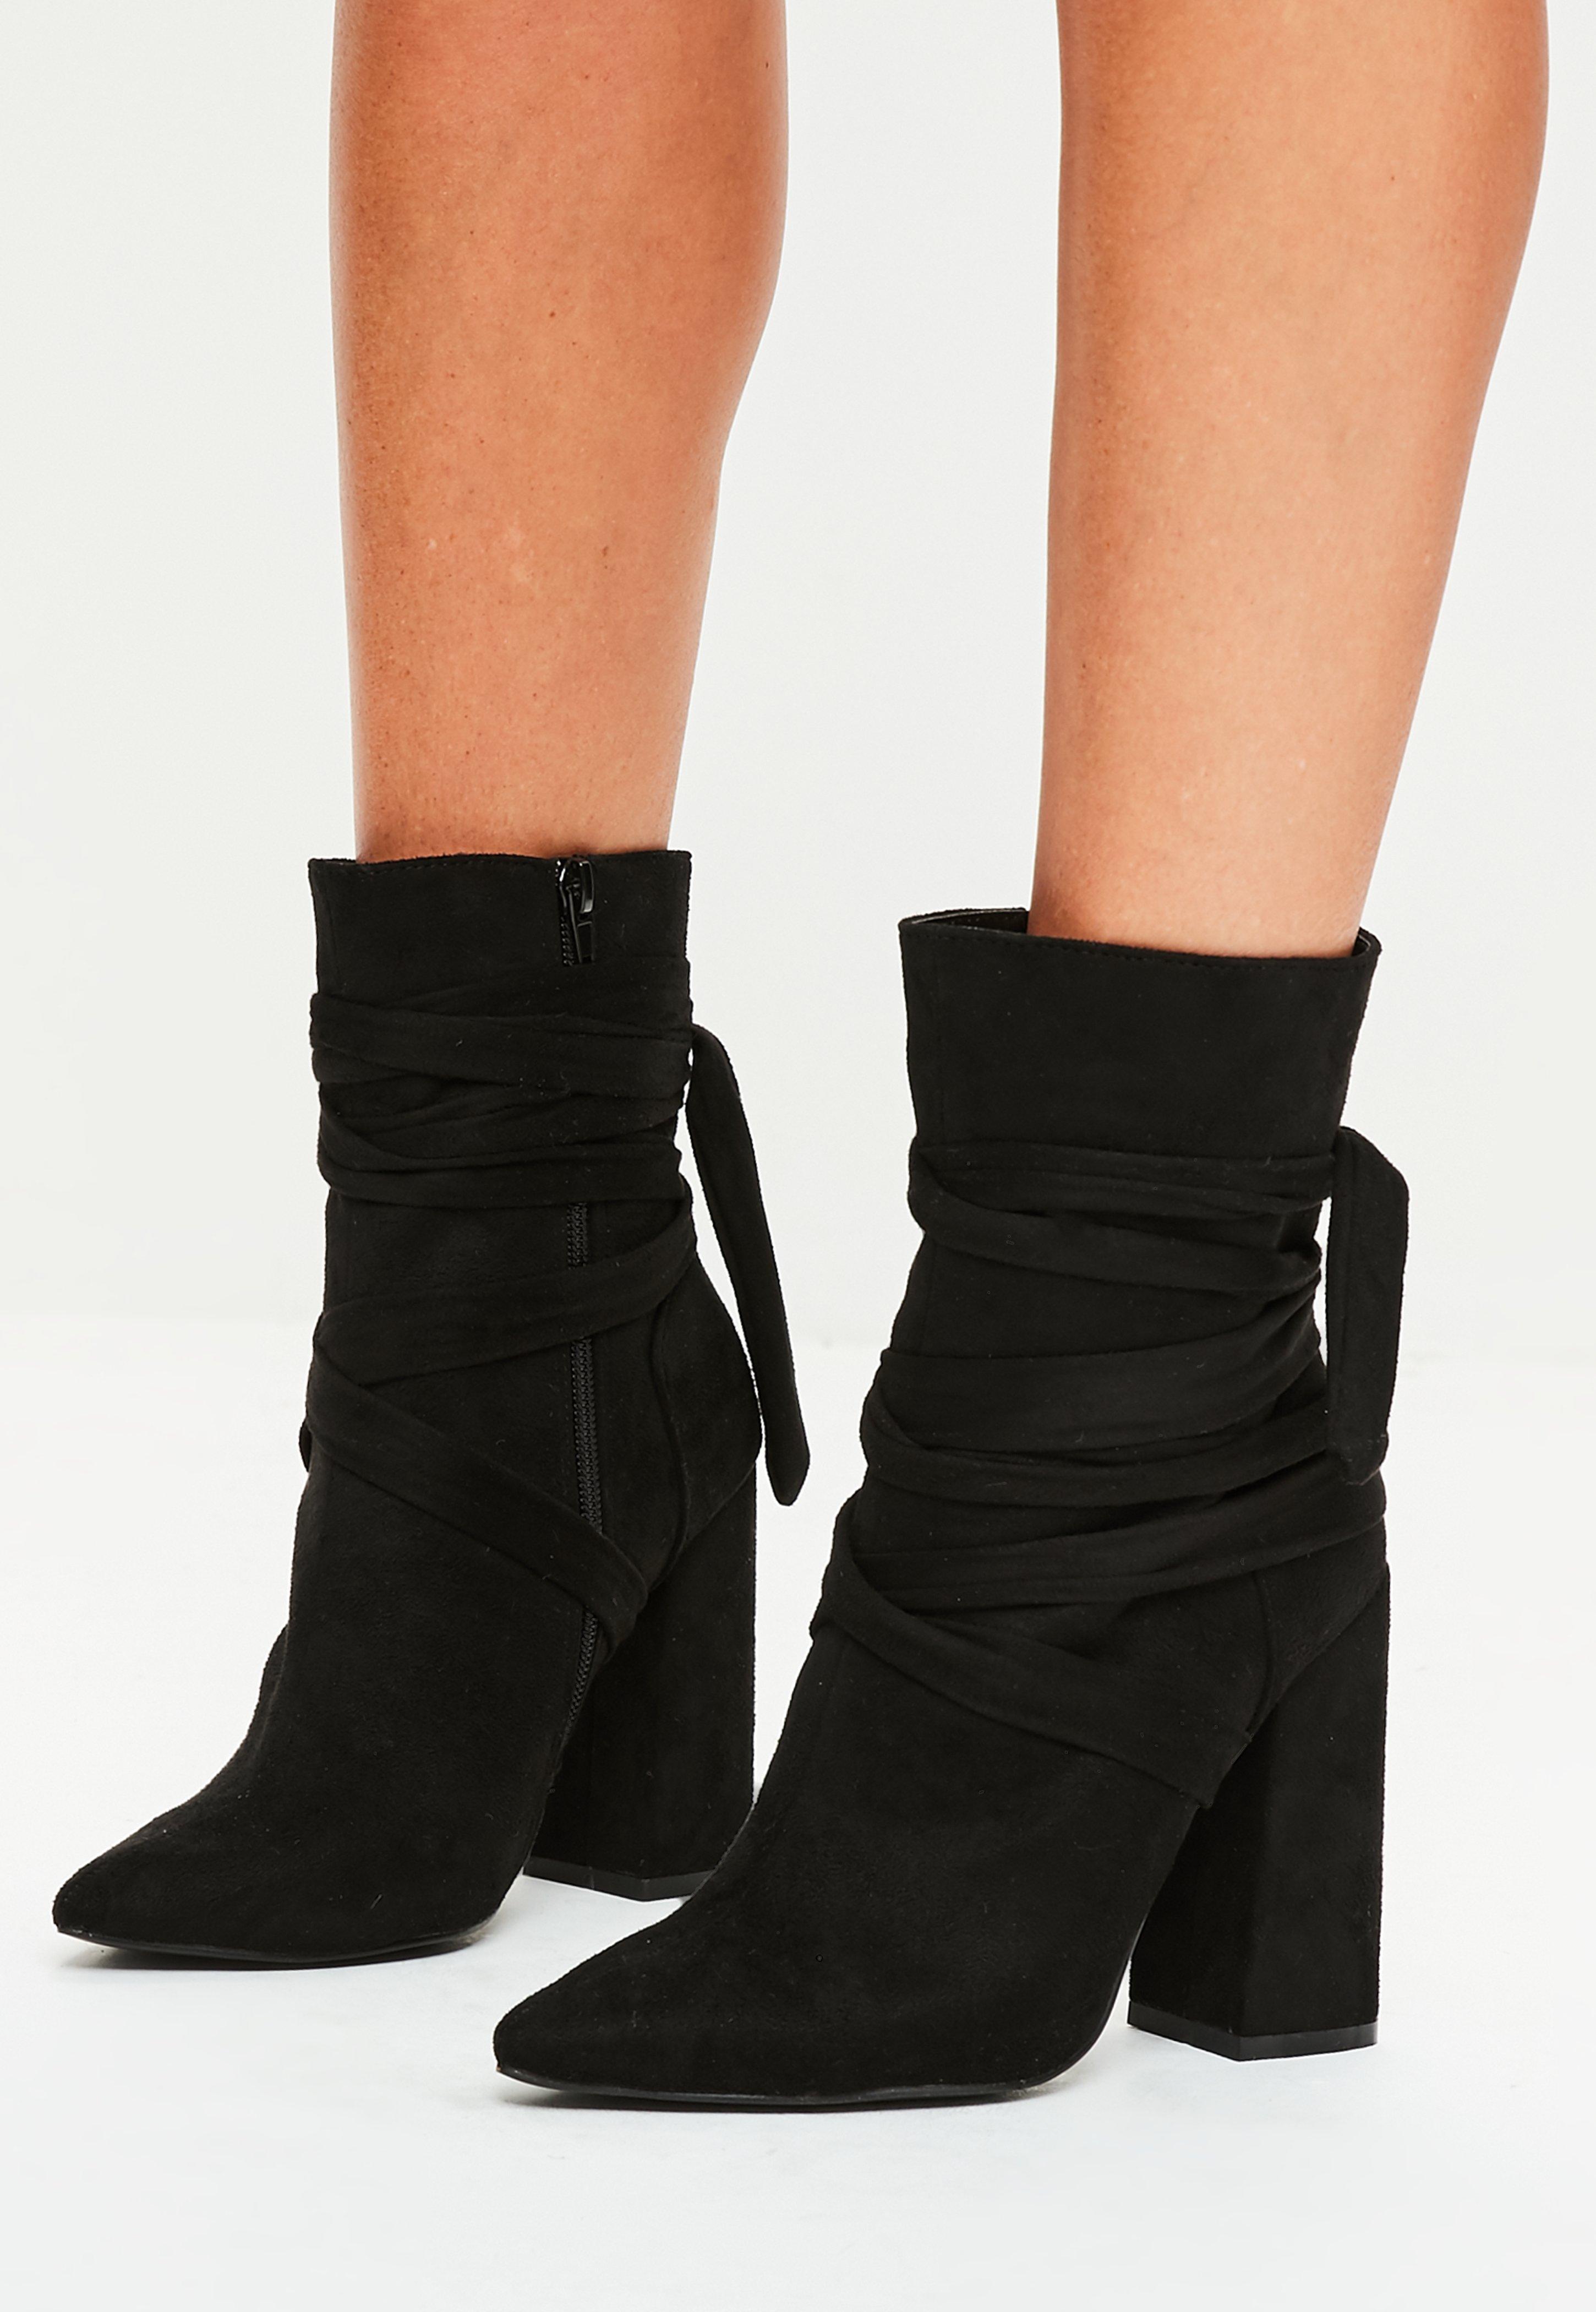 Lyst - Missguided Black Wrap Around Ankle Boots in Black